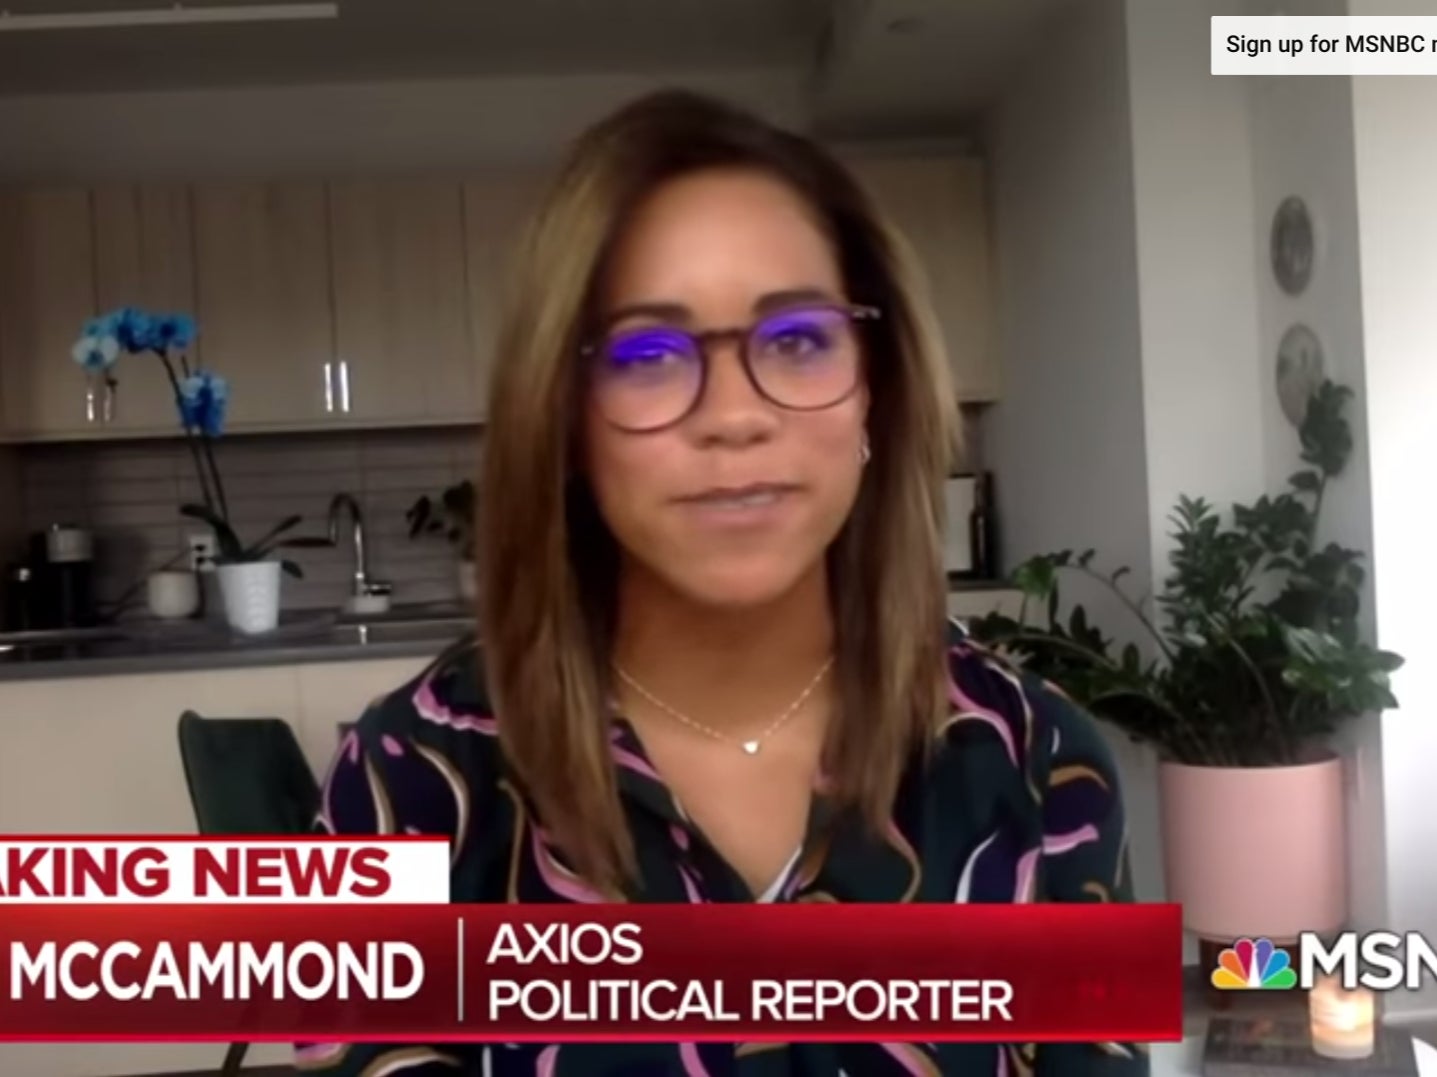 Alex McCammond as a former political reporter, speaking with MSNBC in October 2020